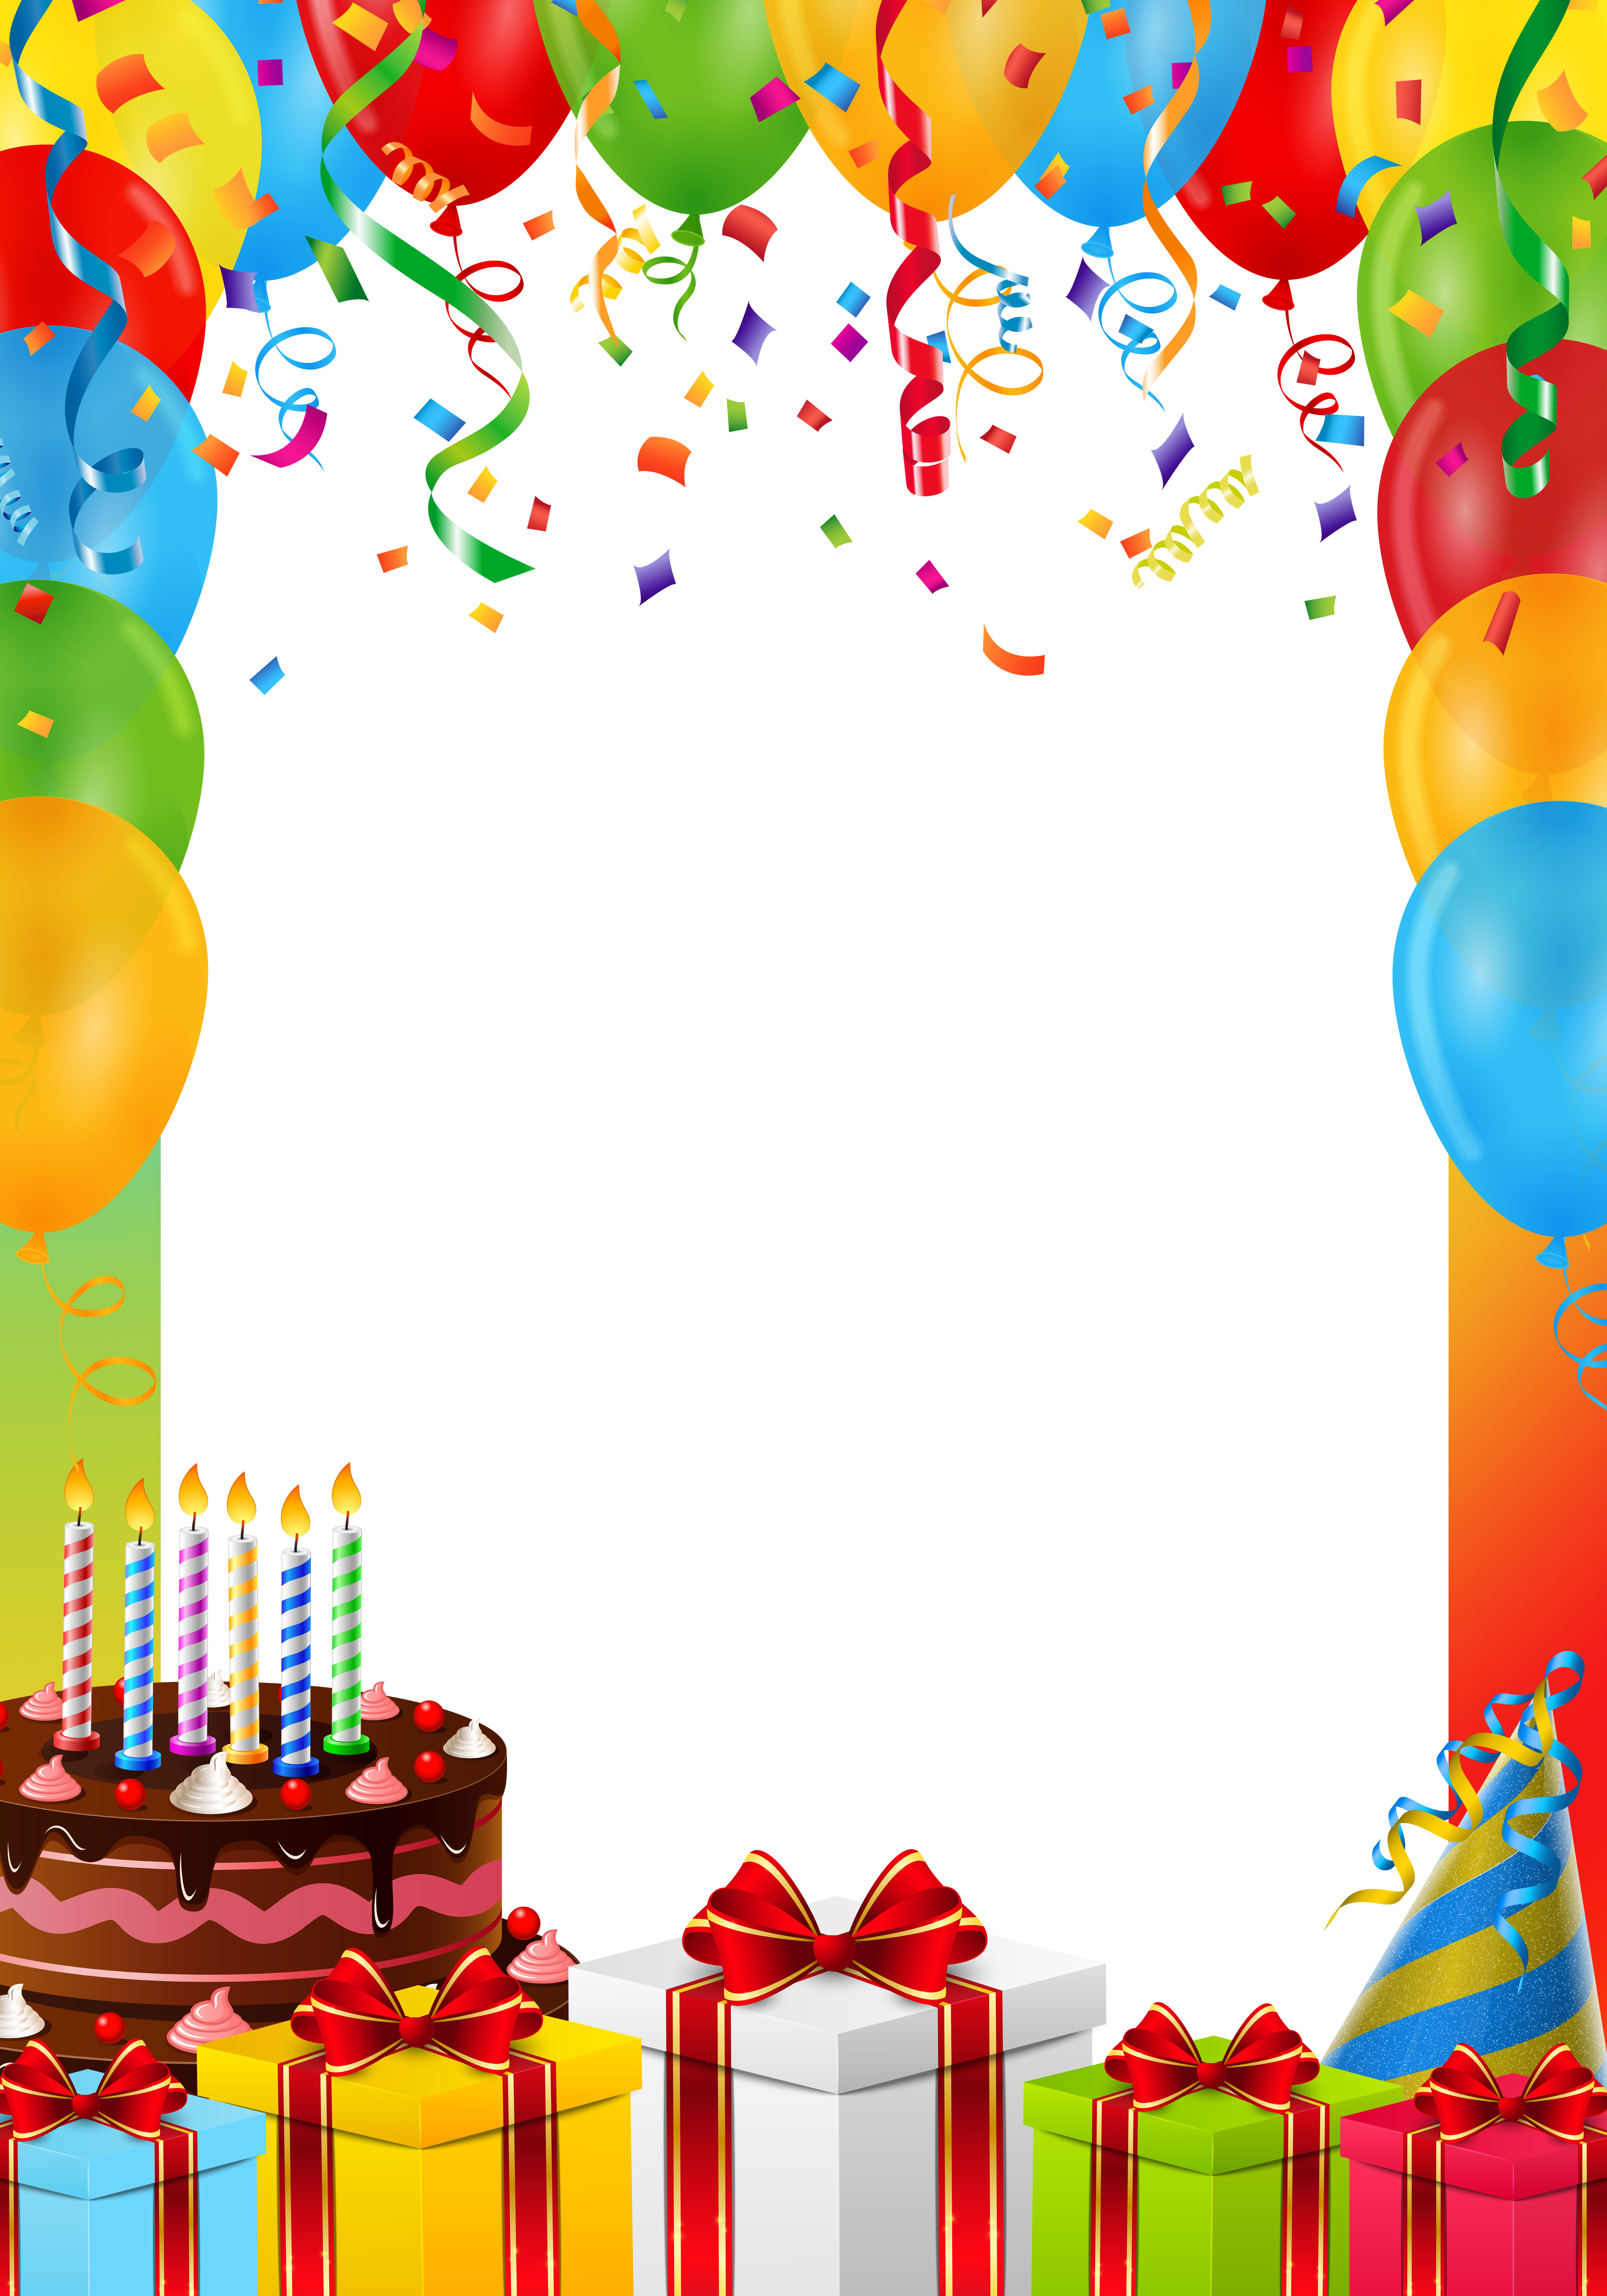 Birthday Frame PNG Transparent Image​-Quality Image and Transparent PNG Free Clipart